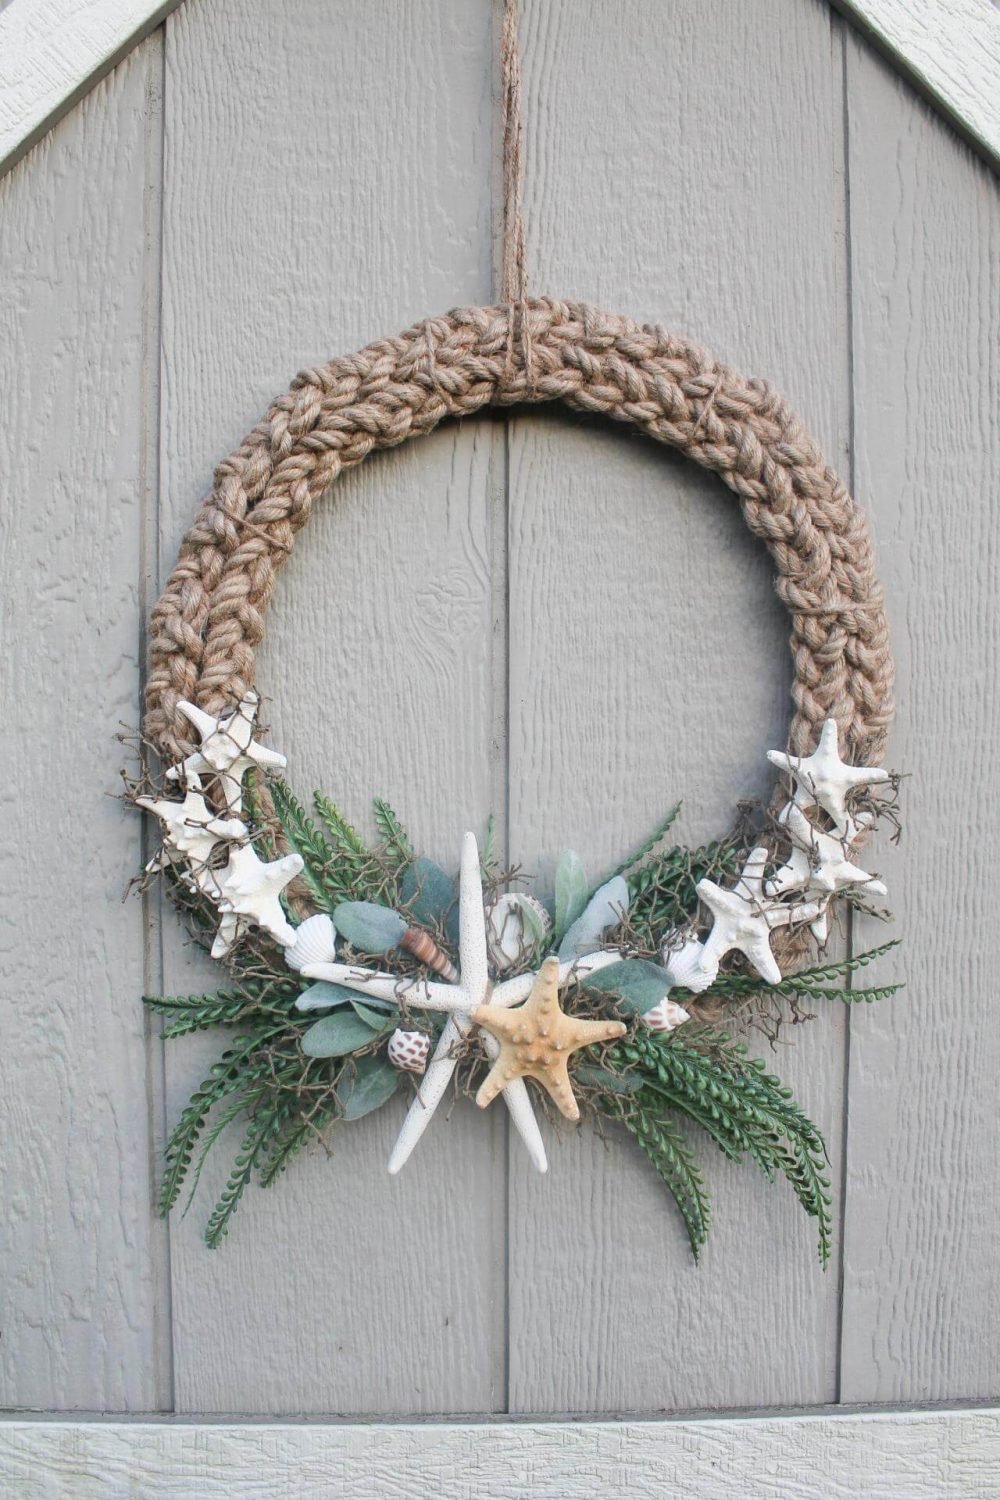 A wreath made out of rope and seashells
